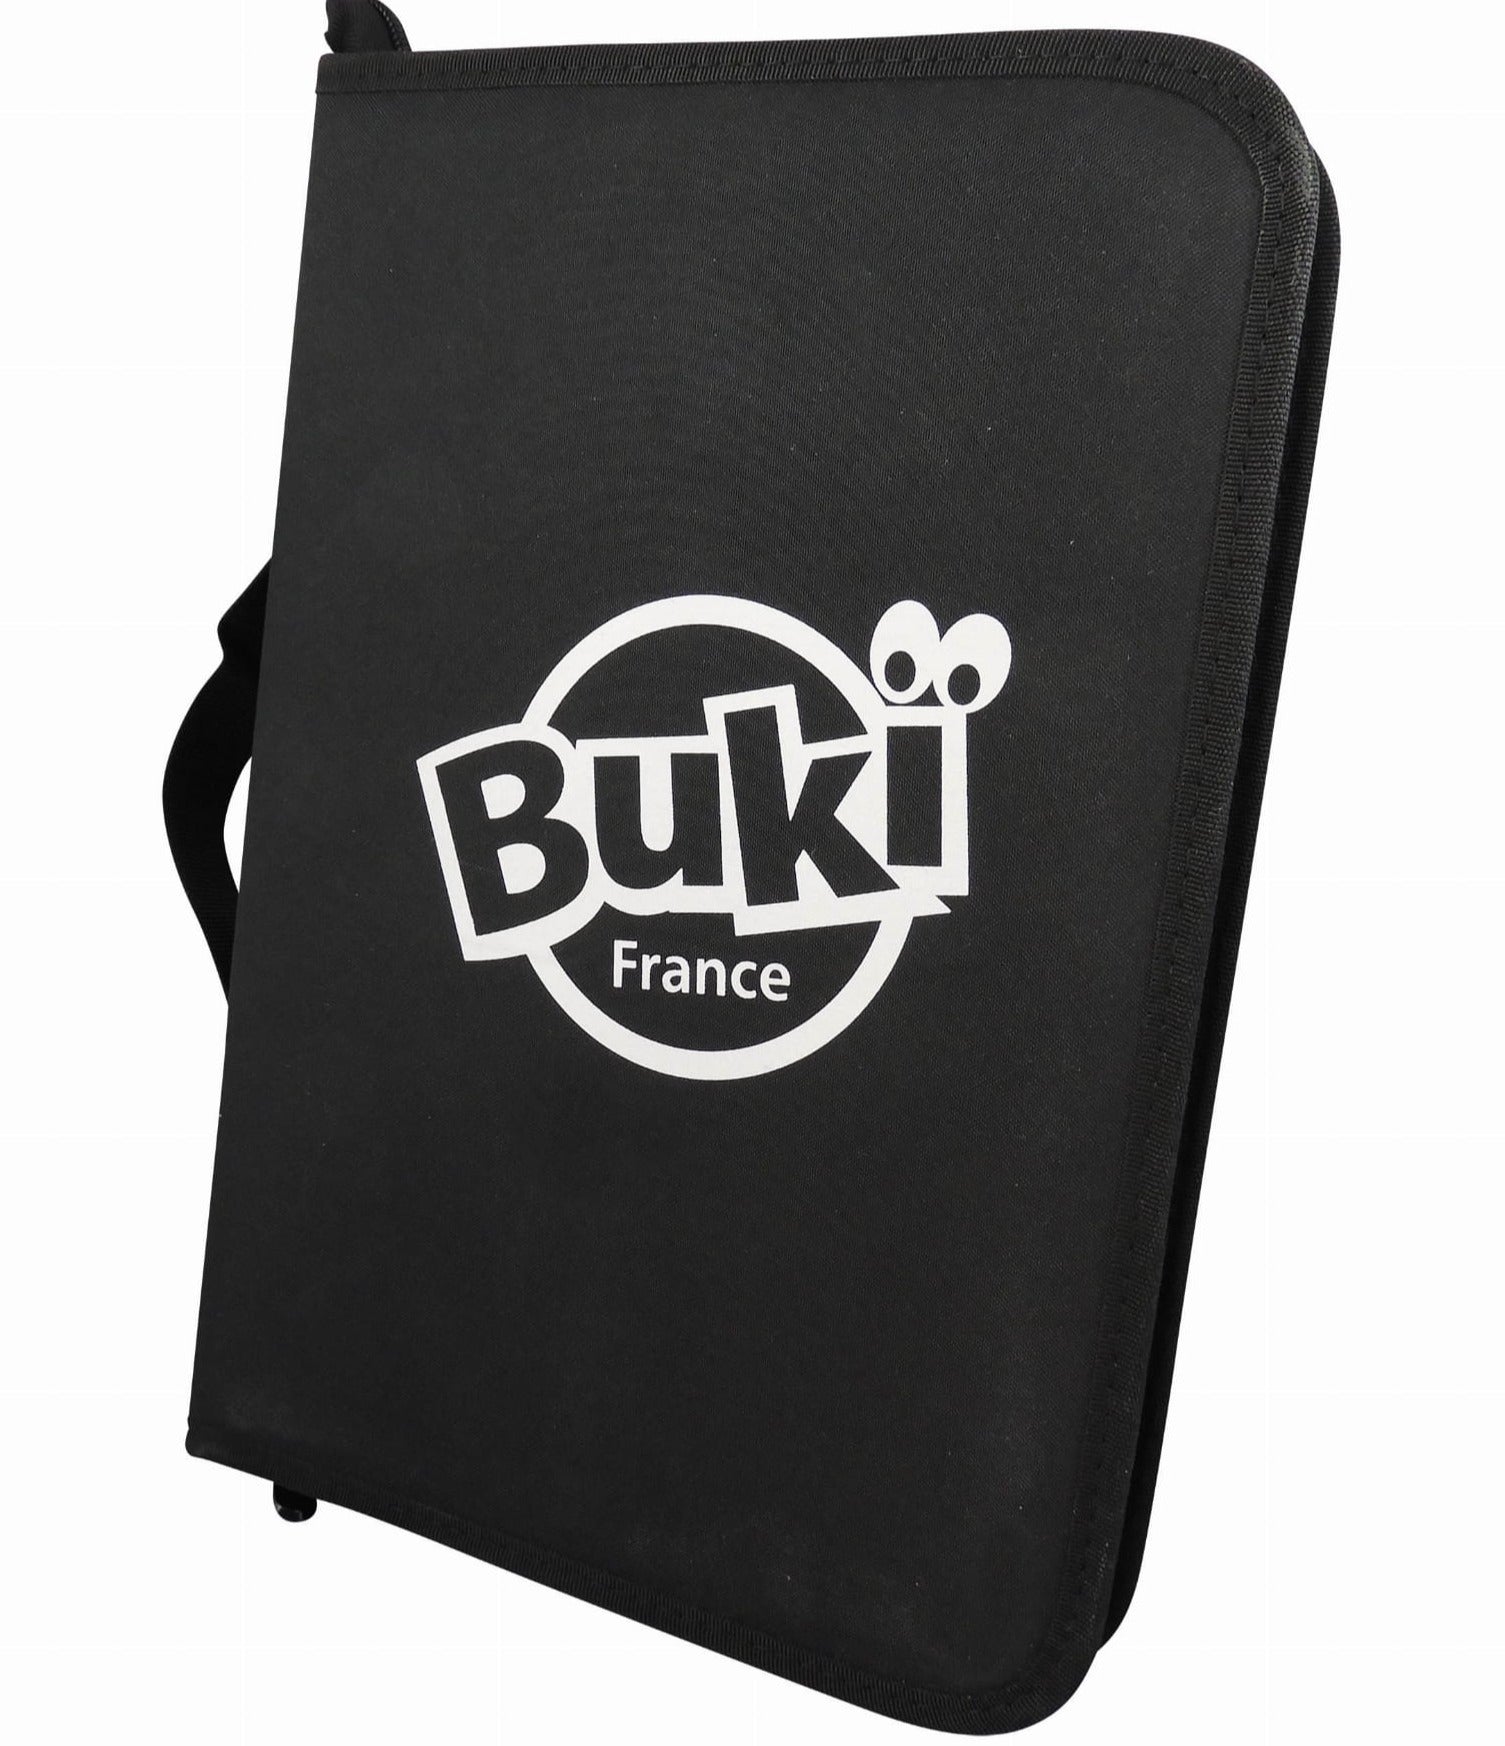 Buki: Small artist's folder with Sketchbook Professional Studio Drawing Case